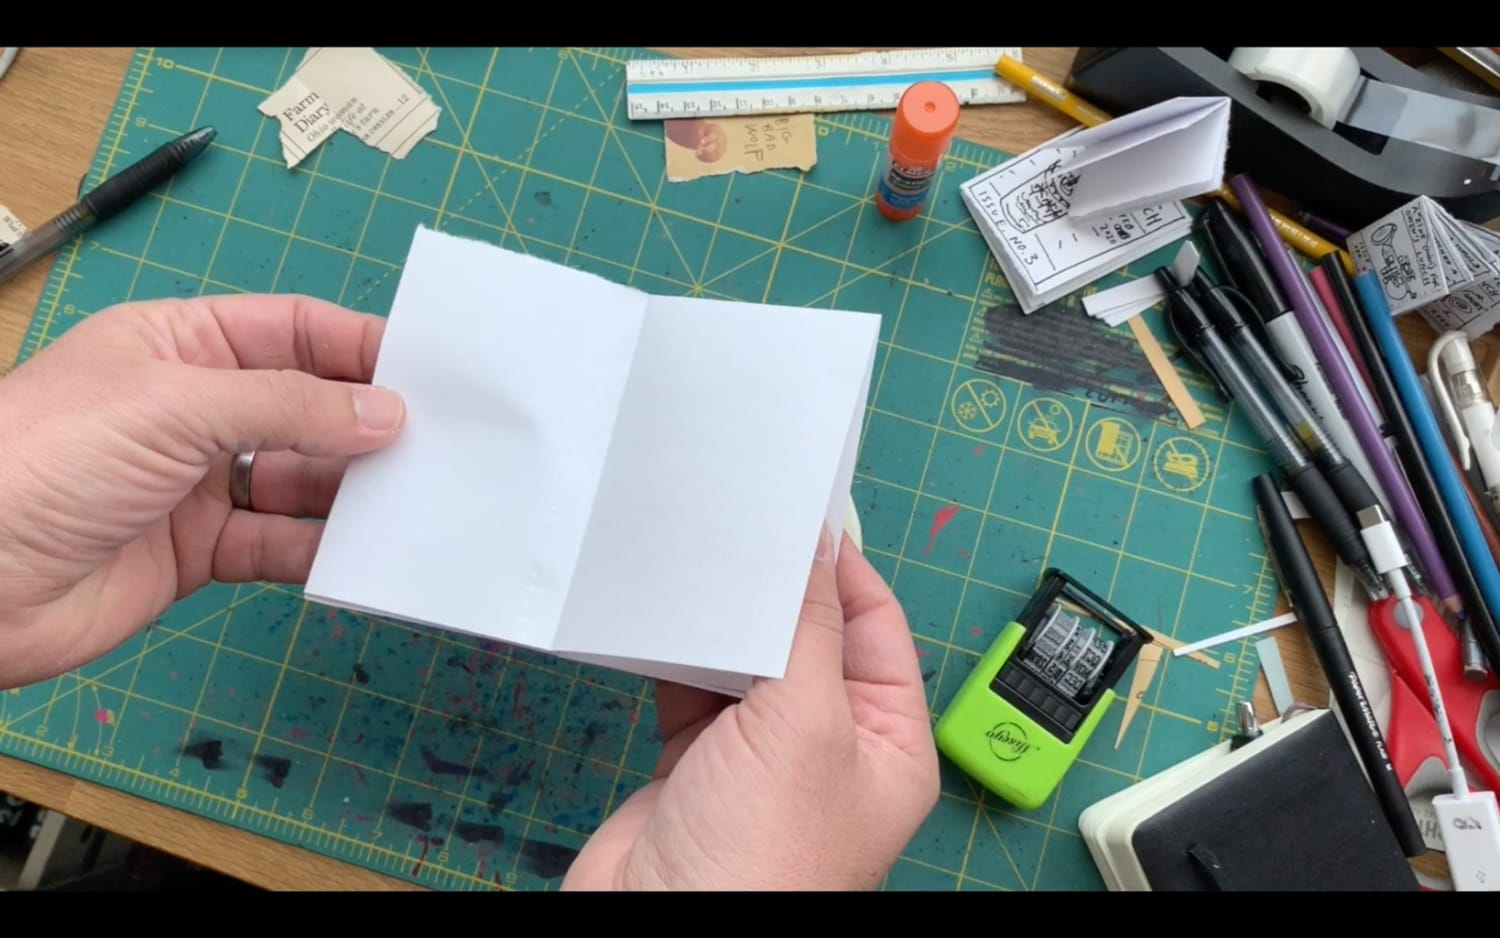 How to make a zine from a single sheet of paper